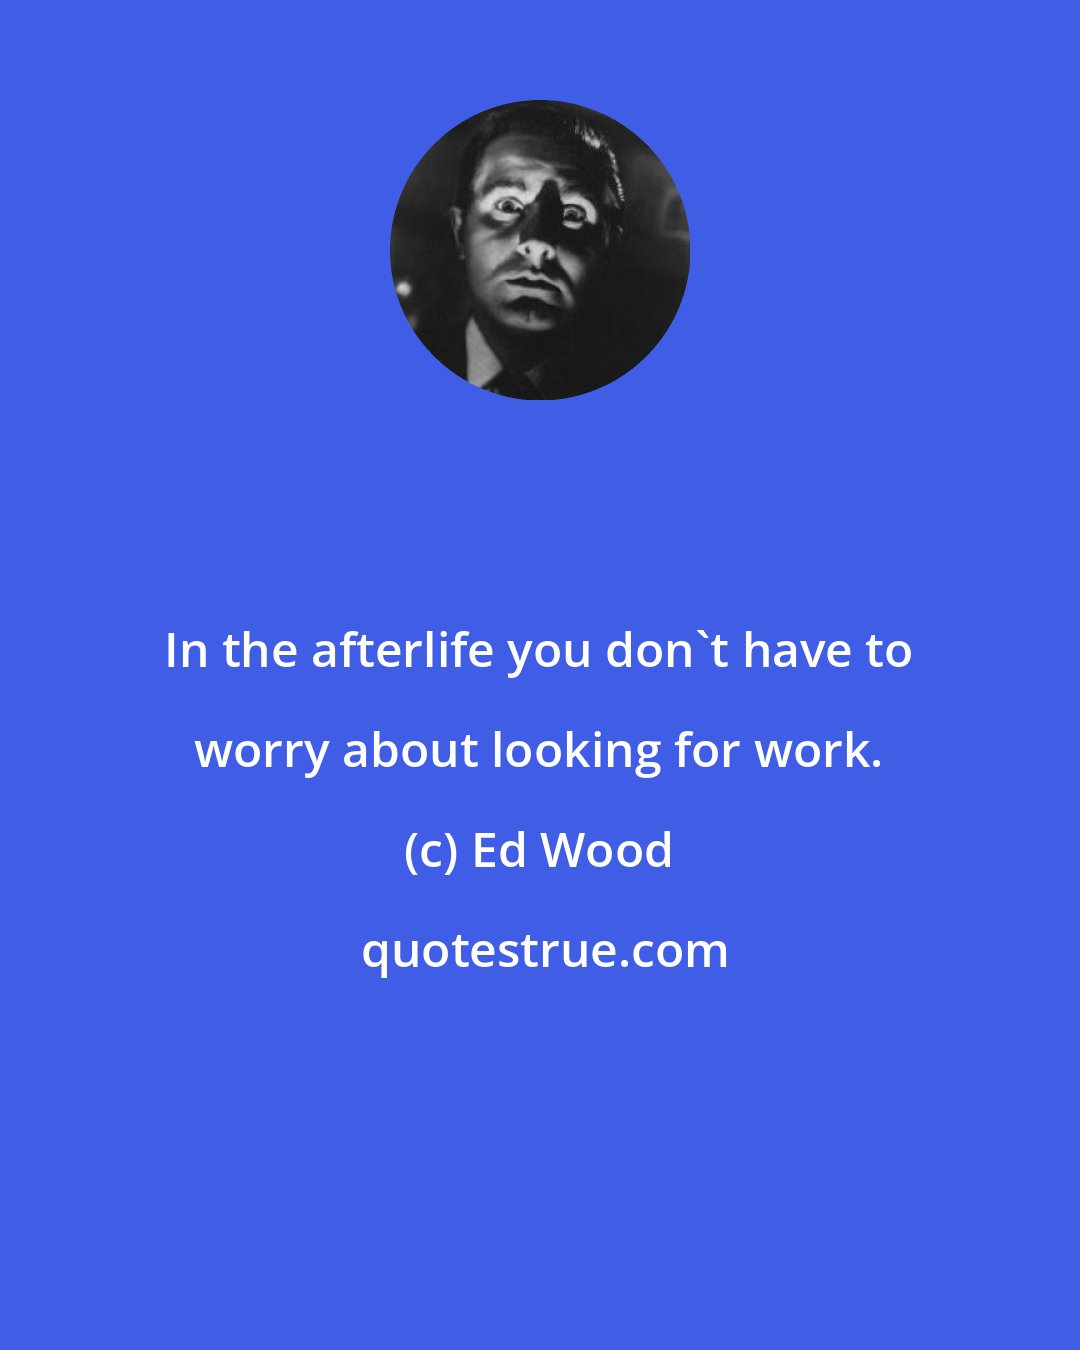 Ed Wood: In the afterlife you don't have to worry about looking for work.